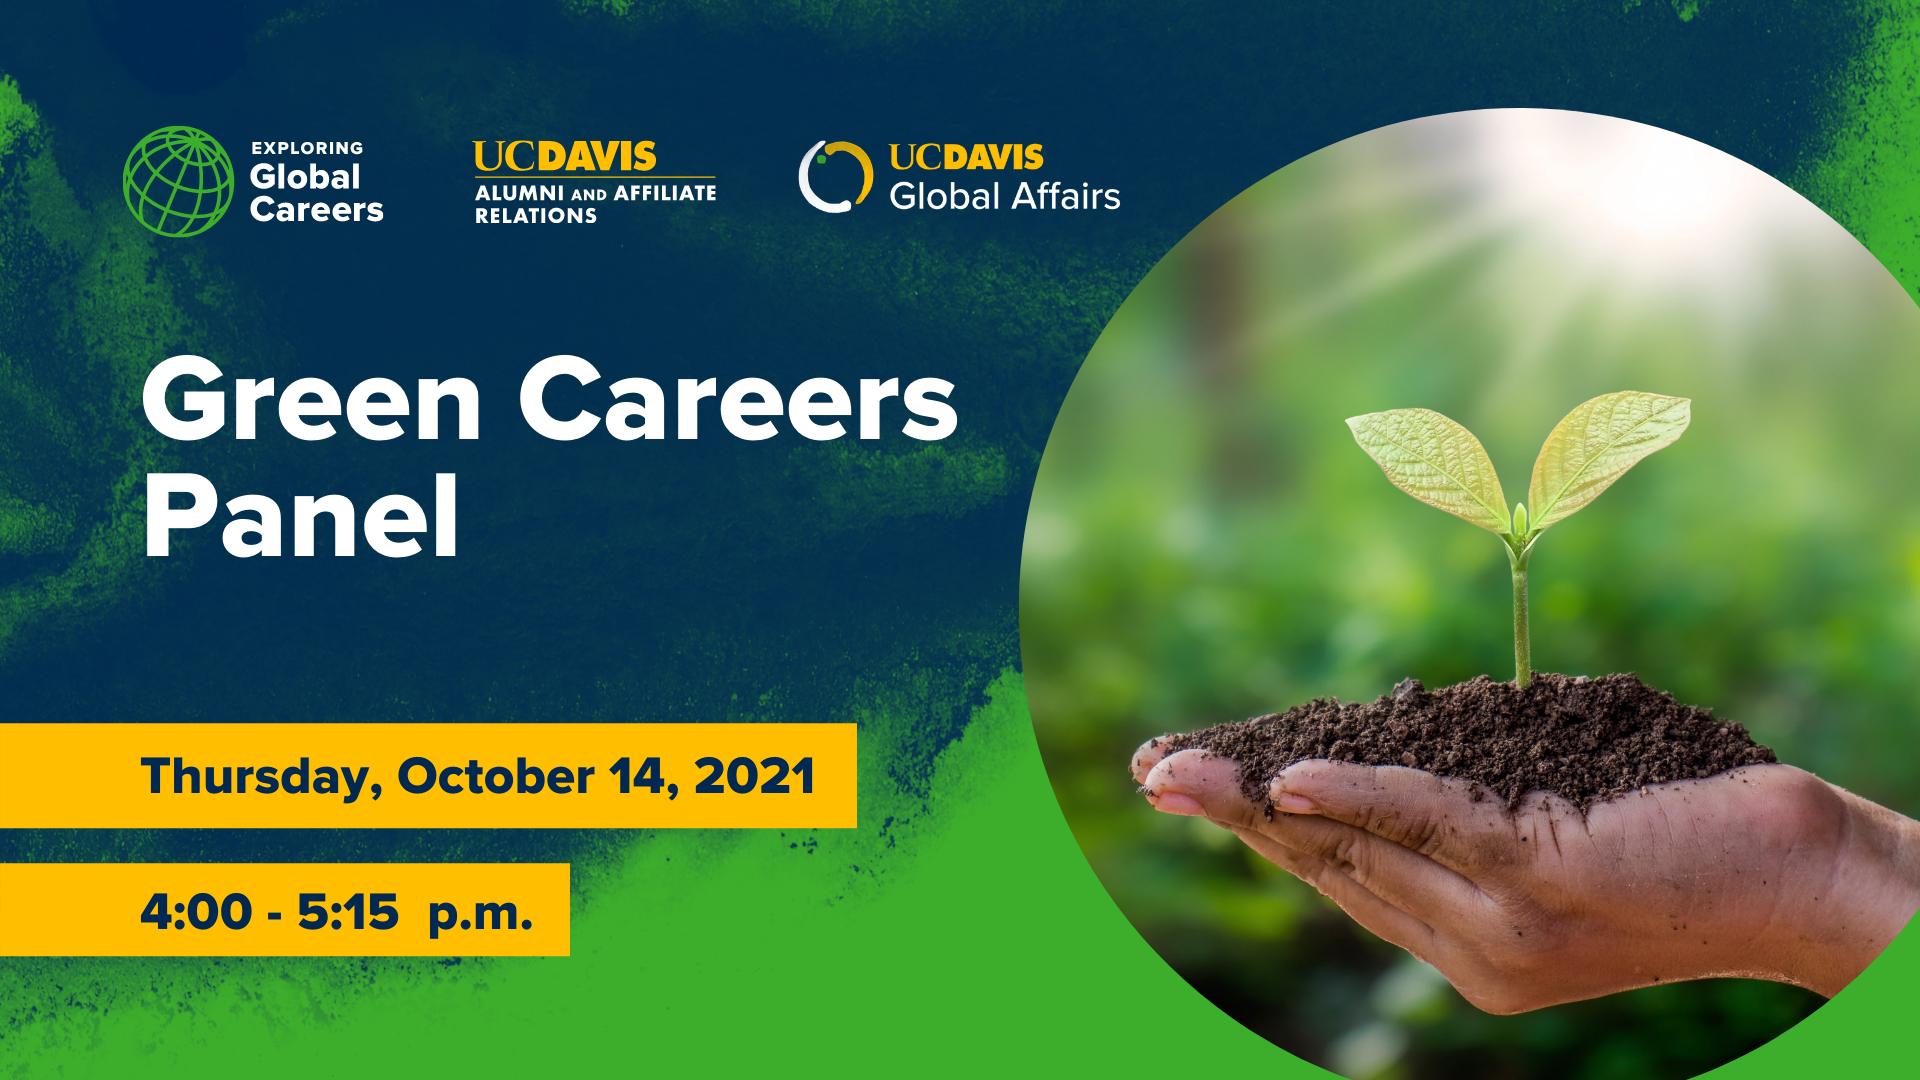 green global careers event on October 14th